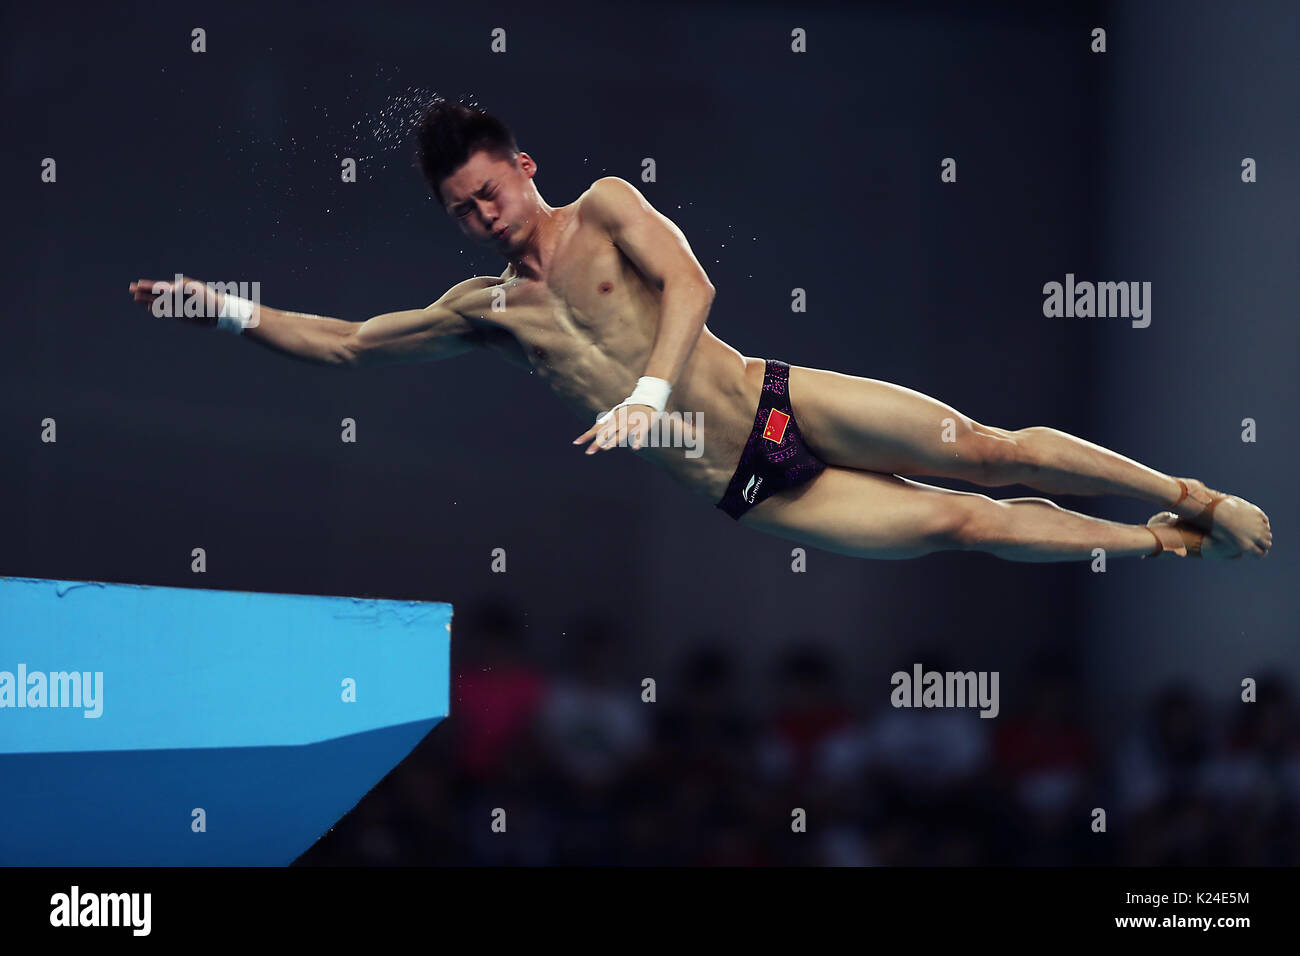 Tianjin. 28th Aug, 2017. Chen Aisen of Guangdong competes during the men's 10m platform final of Diving at the 13th Chinese National Games in north China's Tianjin Municipality, Aug. 28, 2017. Chen Aisen claimed the title with 613.55 points. Credit: Fei Maohua/Xinhua/Alamy Live News Stock Photo